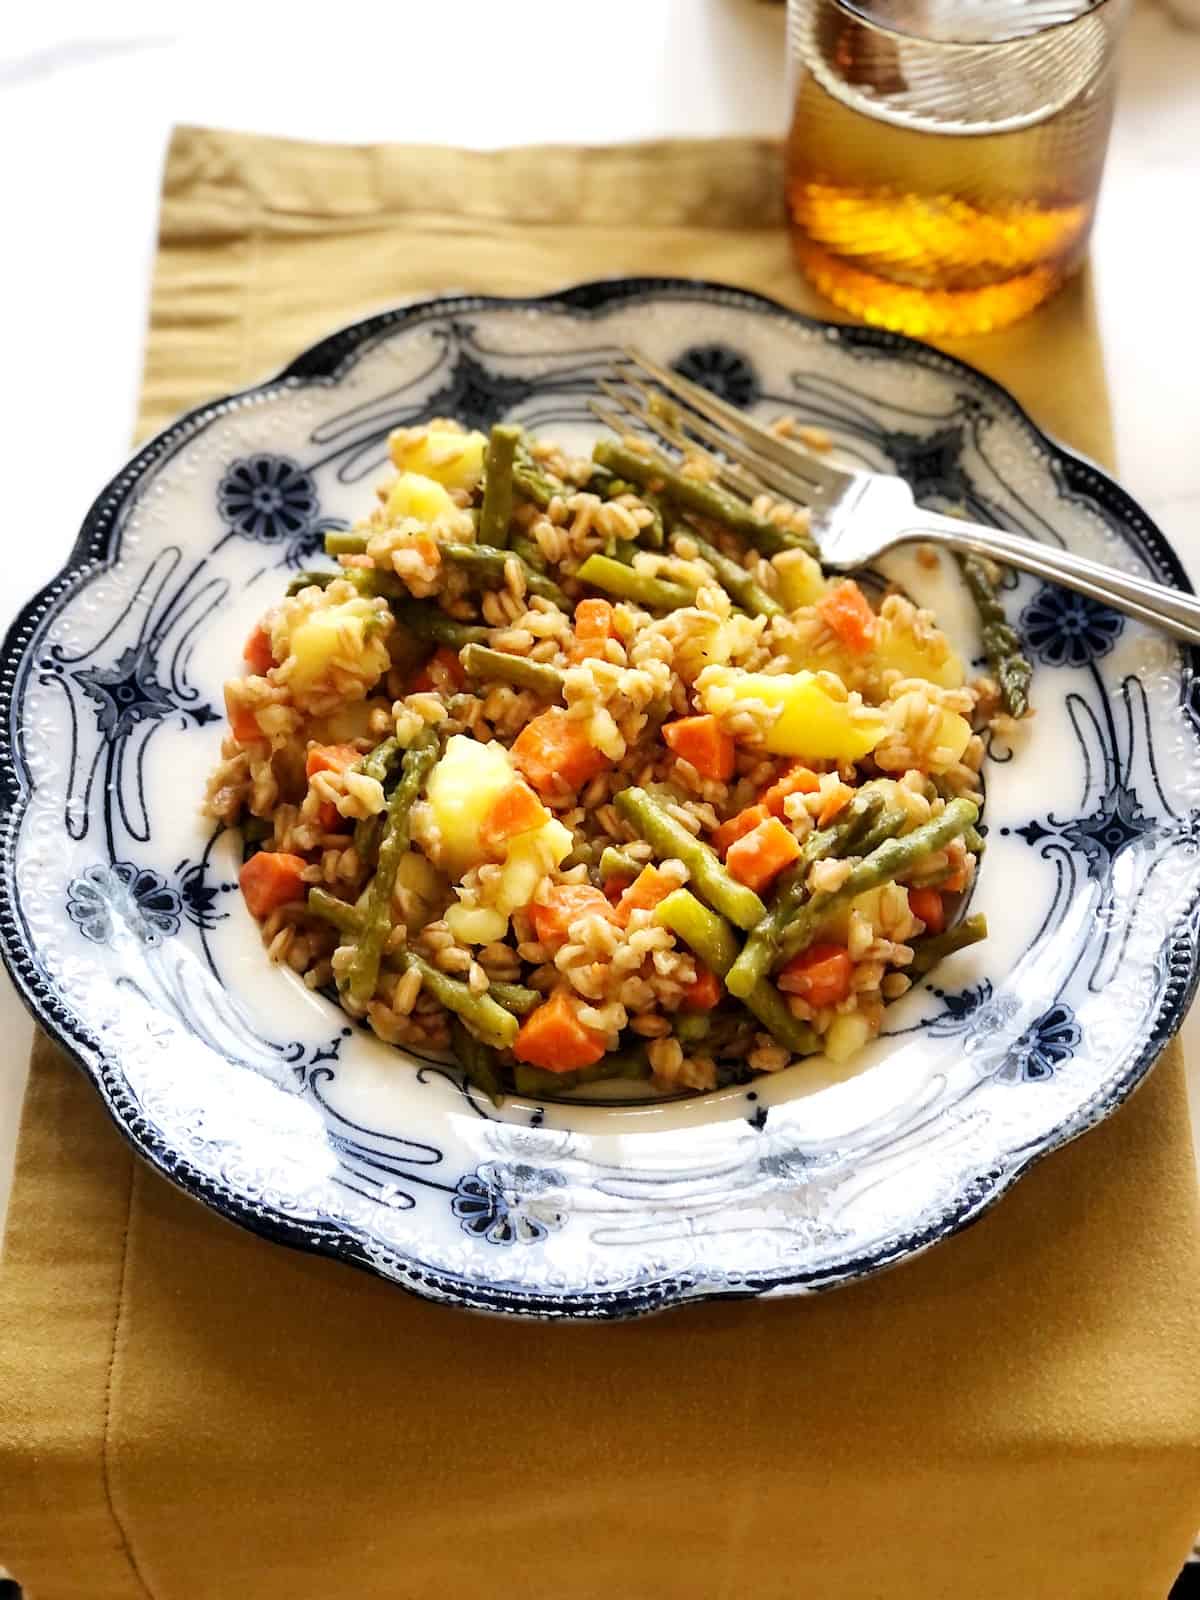 farro and vegetables on plate with yellow napkin